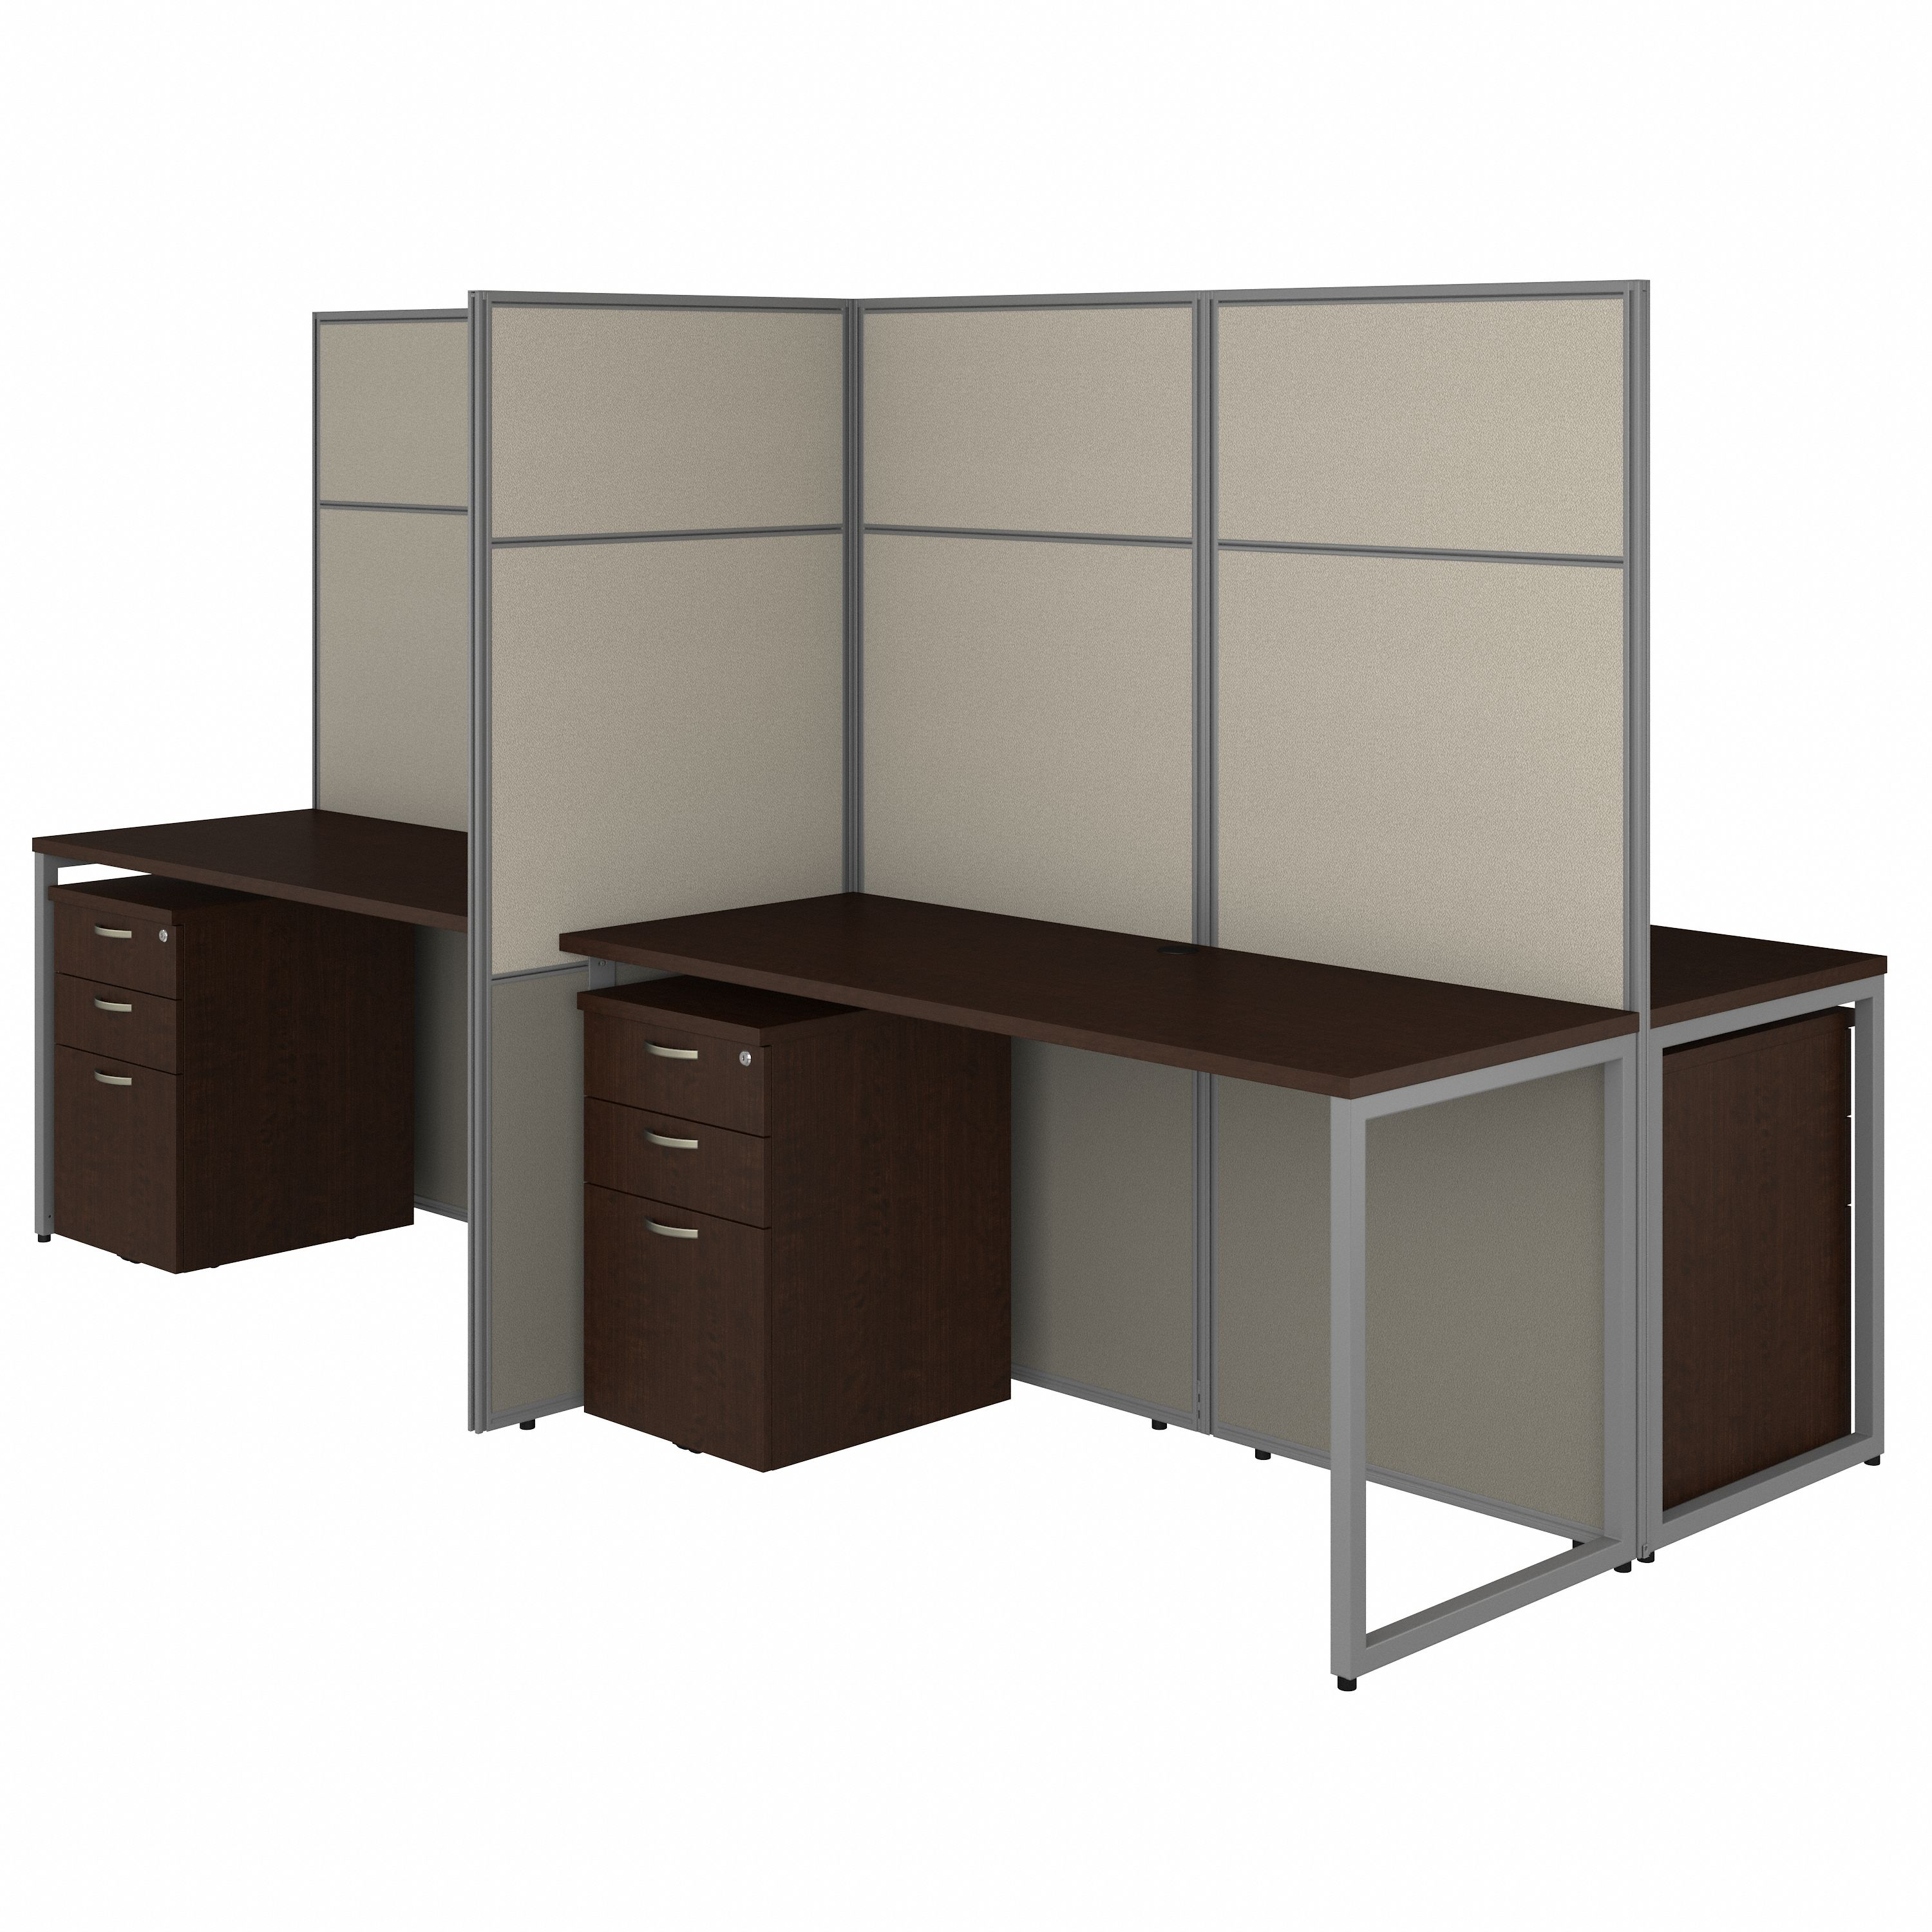 Shop Bush Business Furniture Easy Office 60W 4 Person Cubicle Desk with File Cabinets and 66H Panels 02 EODH66SMR-03K #color_mocha cherry